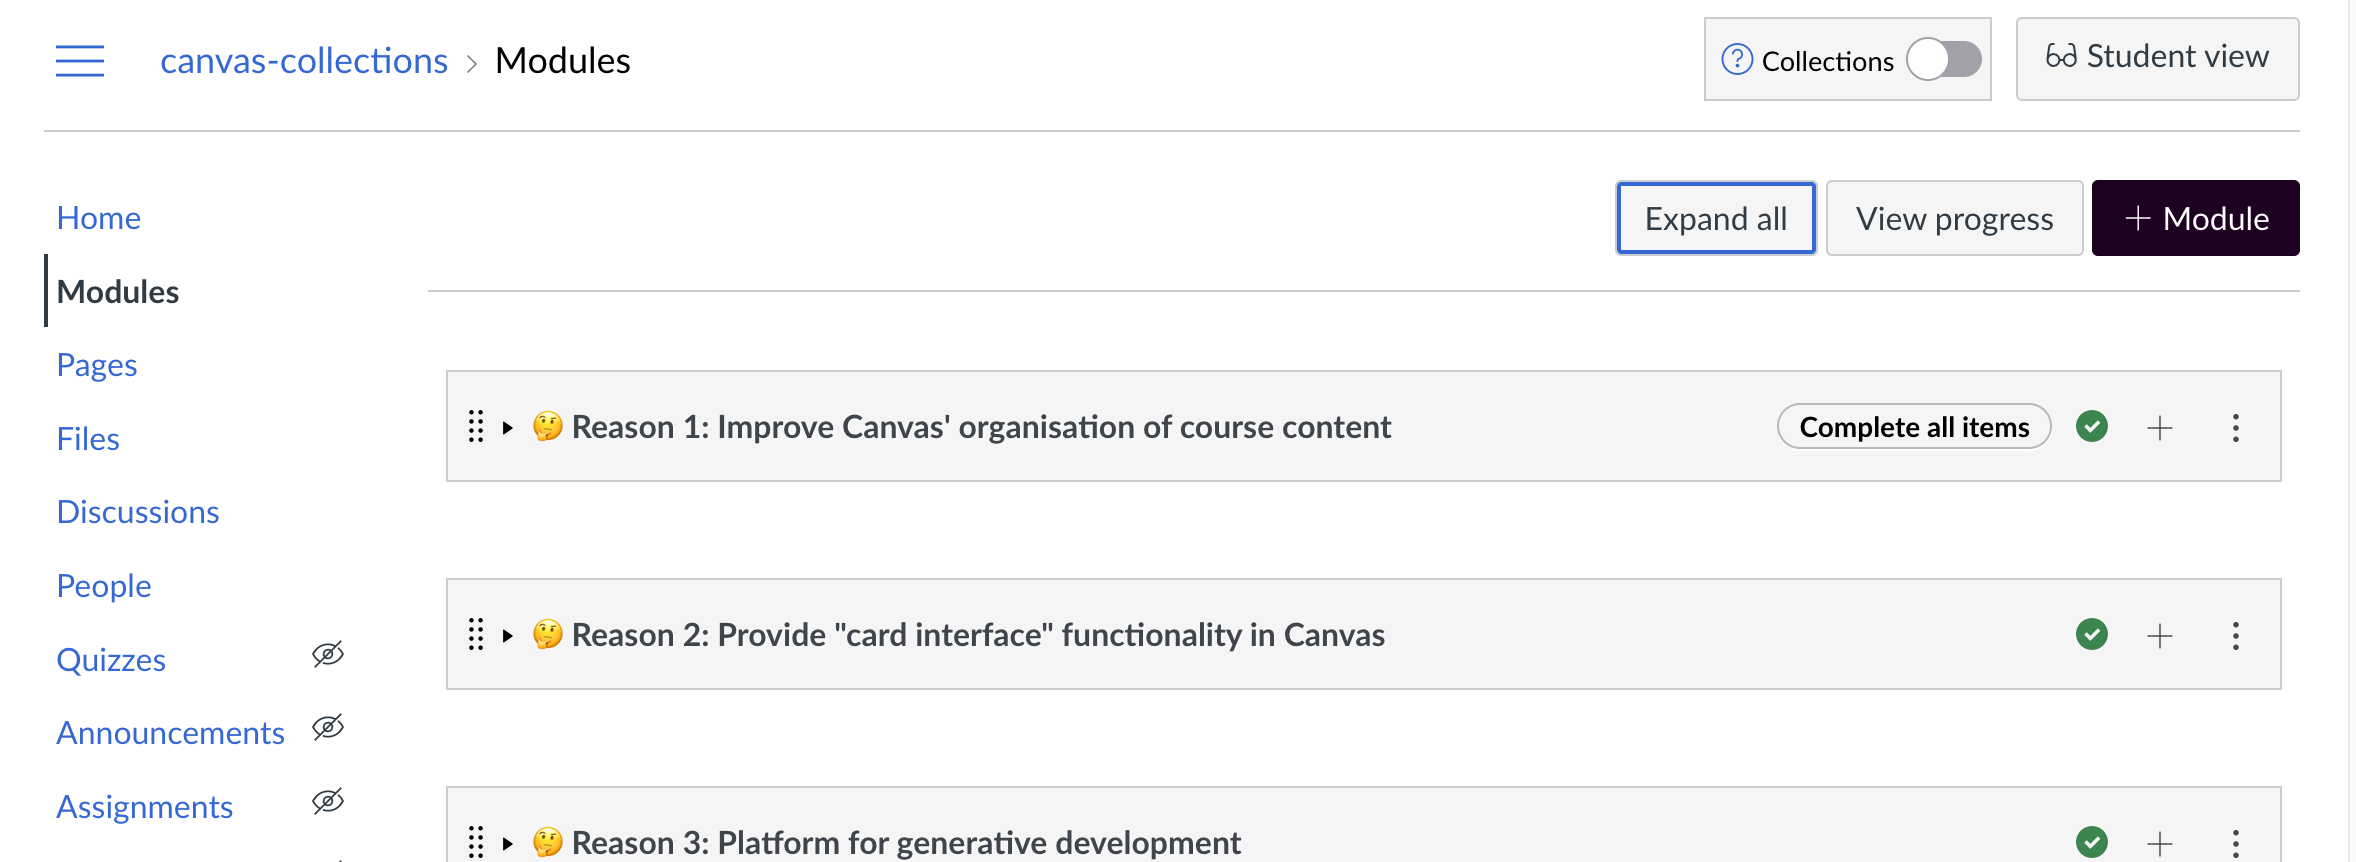 Screenshot of Canvas modules page with the Collections configuration element in the top right-hand corner